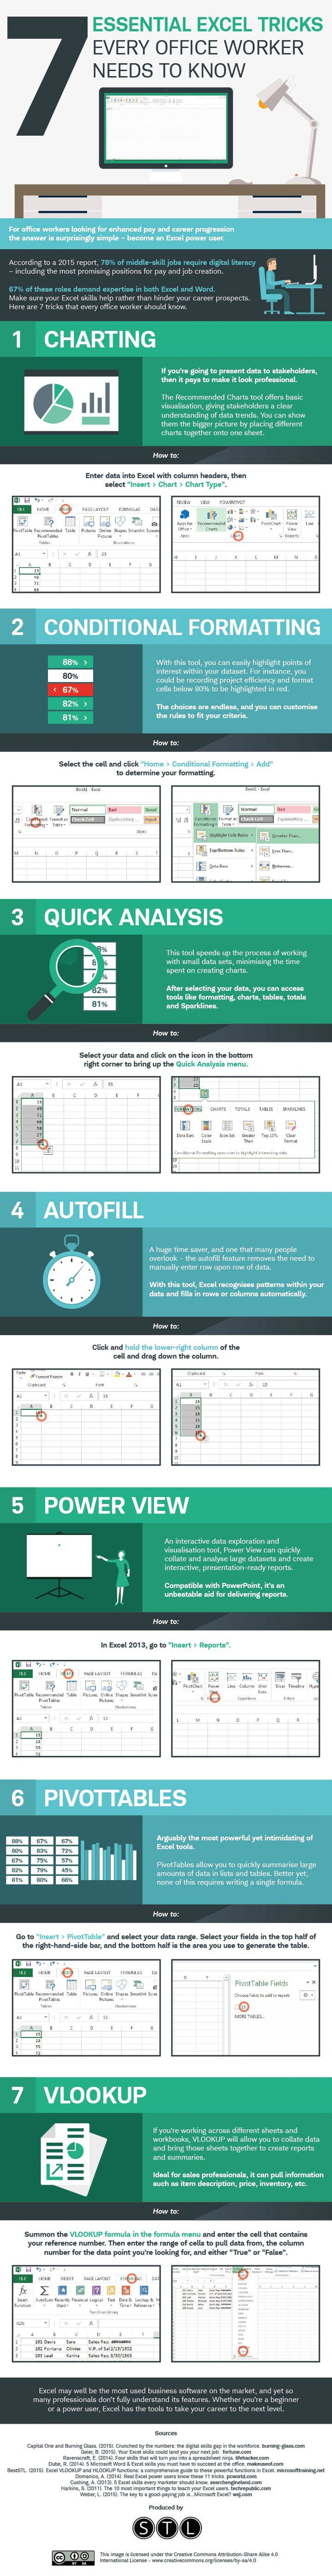 The Spreadsheet Guru Pertaining To 7 Tips To Become A Microsoft Excel Spreadsheet Guru [Infographic